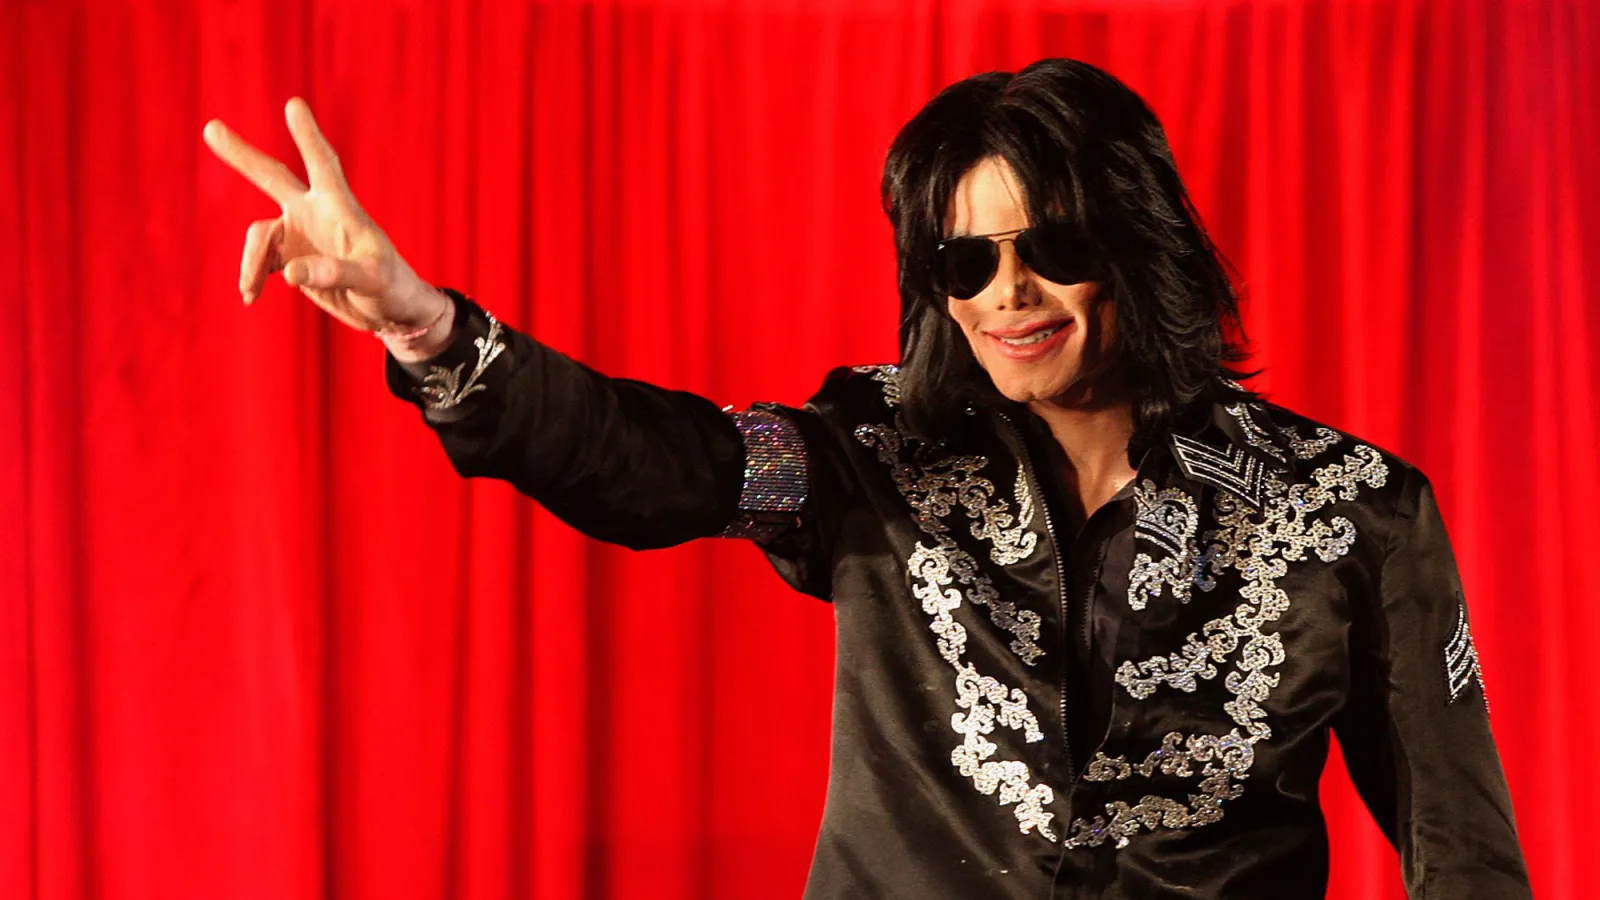 The King of Pop: A Journey through the Extraordinary Life of Michael Jackson